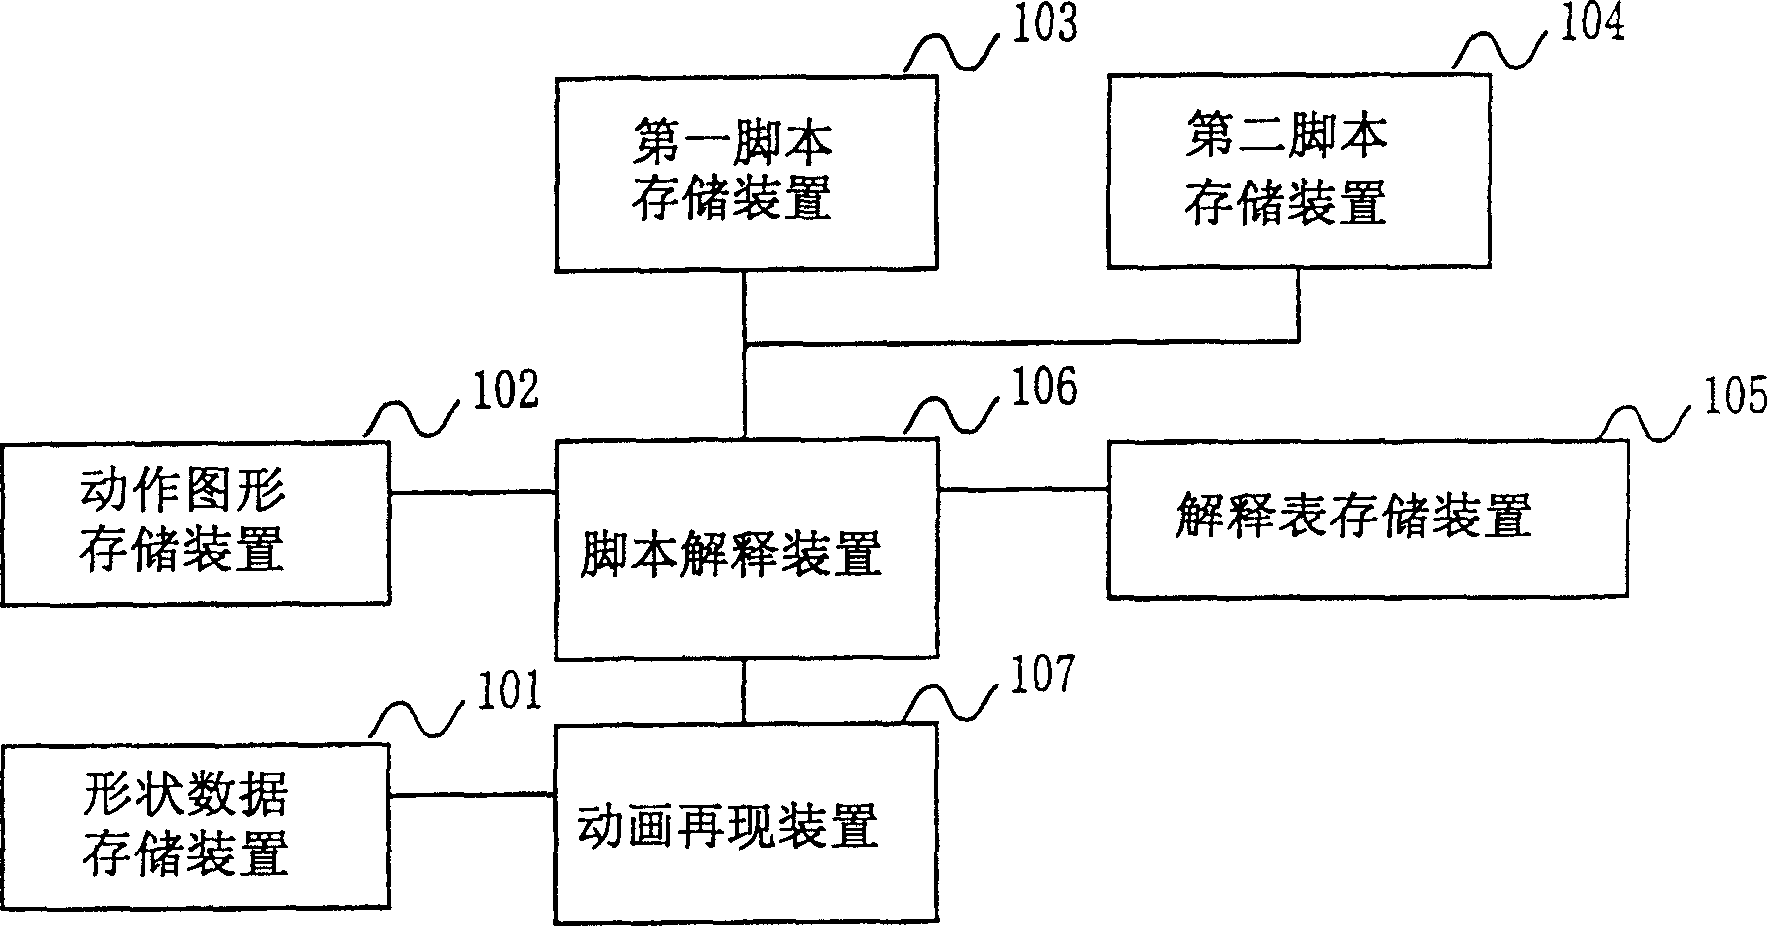 Device, system, method and program for reproducing or transferring animation